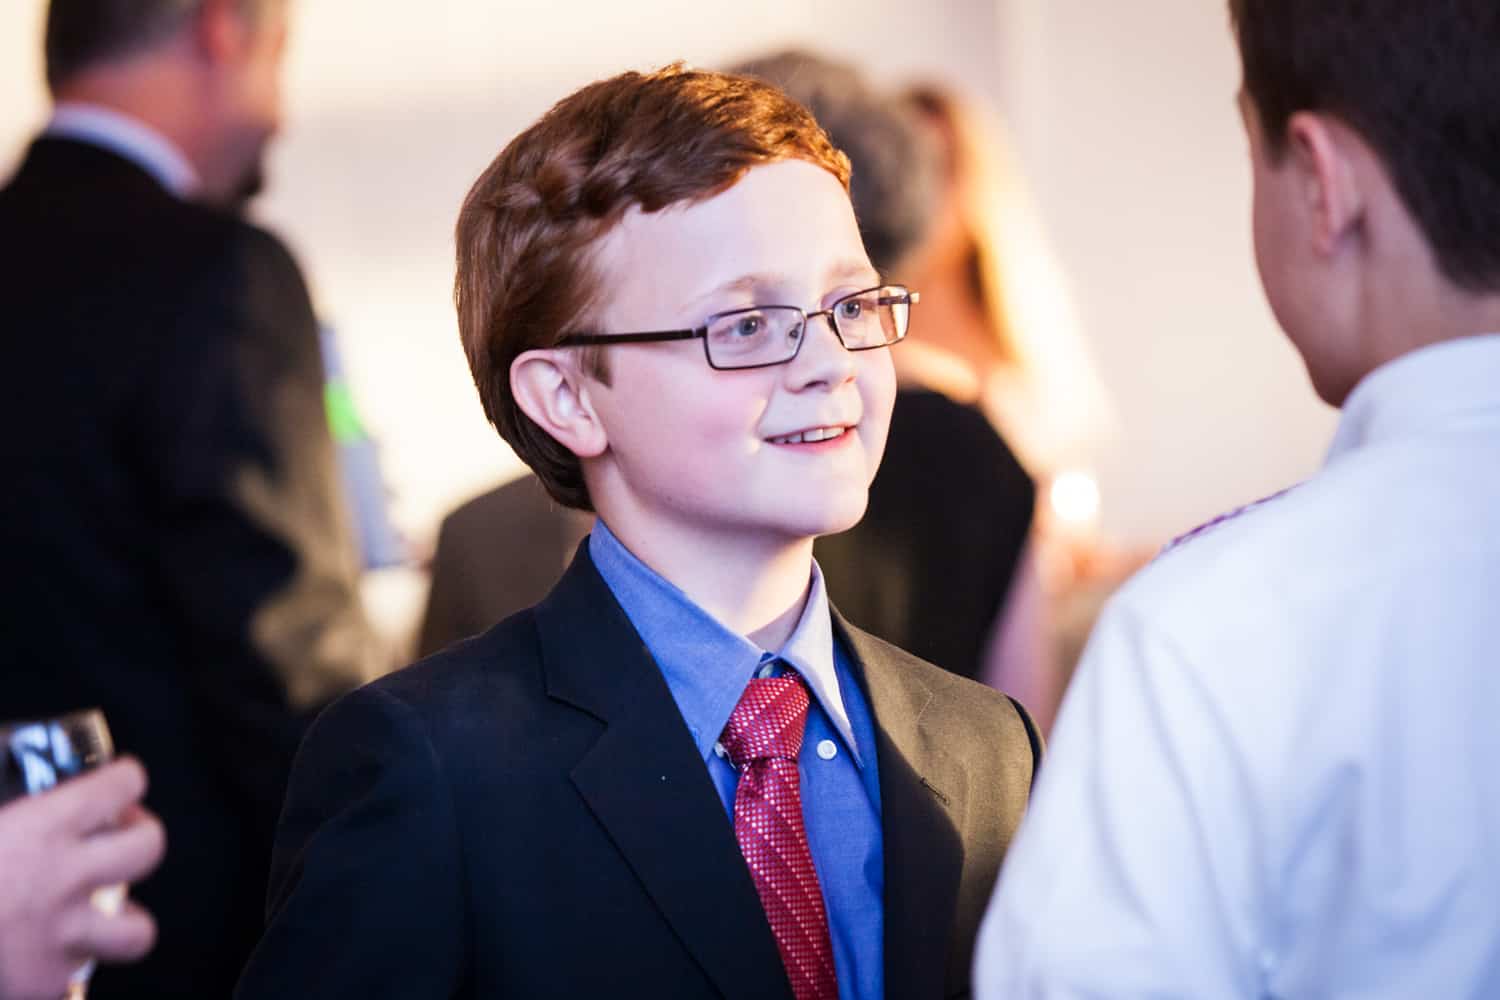 Birthday boy at a bar mitzvah for an article on how to plan the perfect bar mitzvah